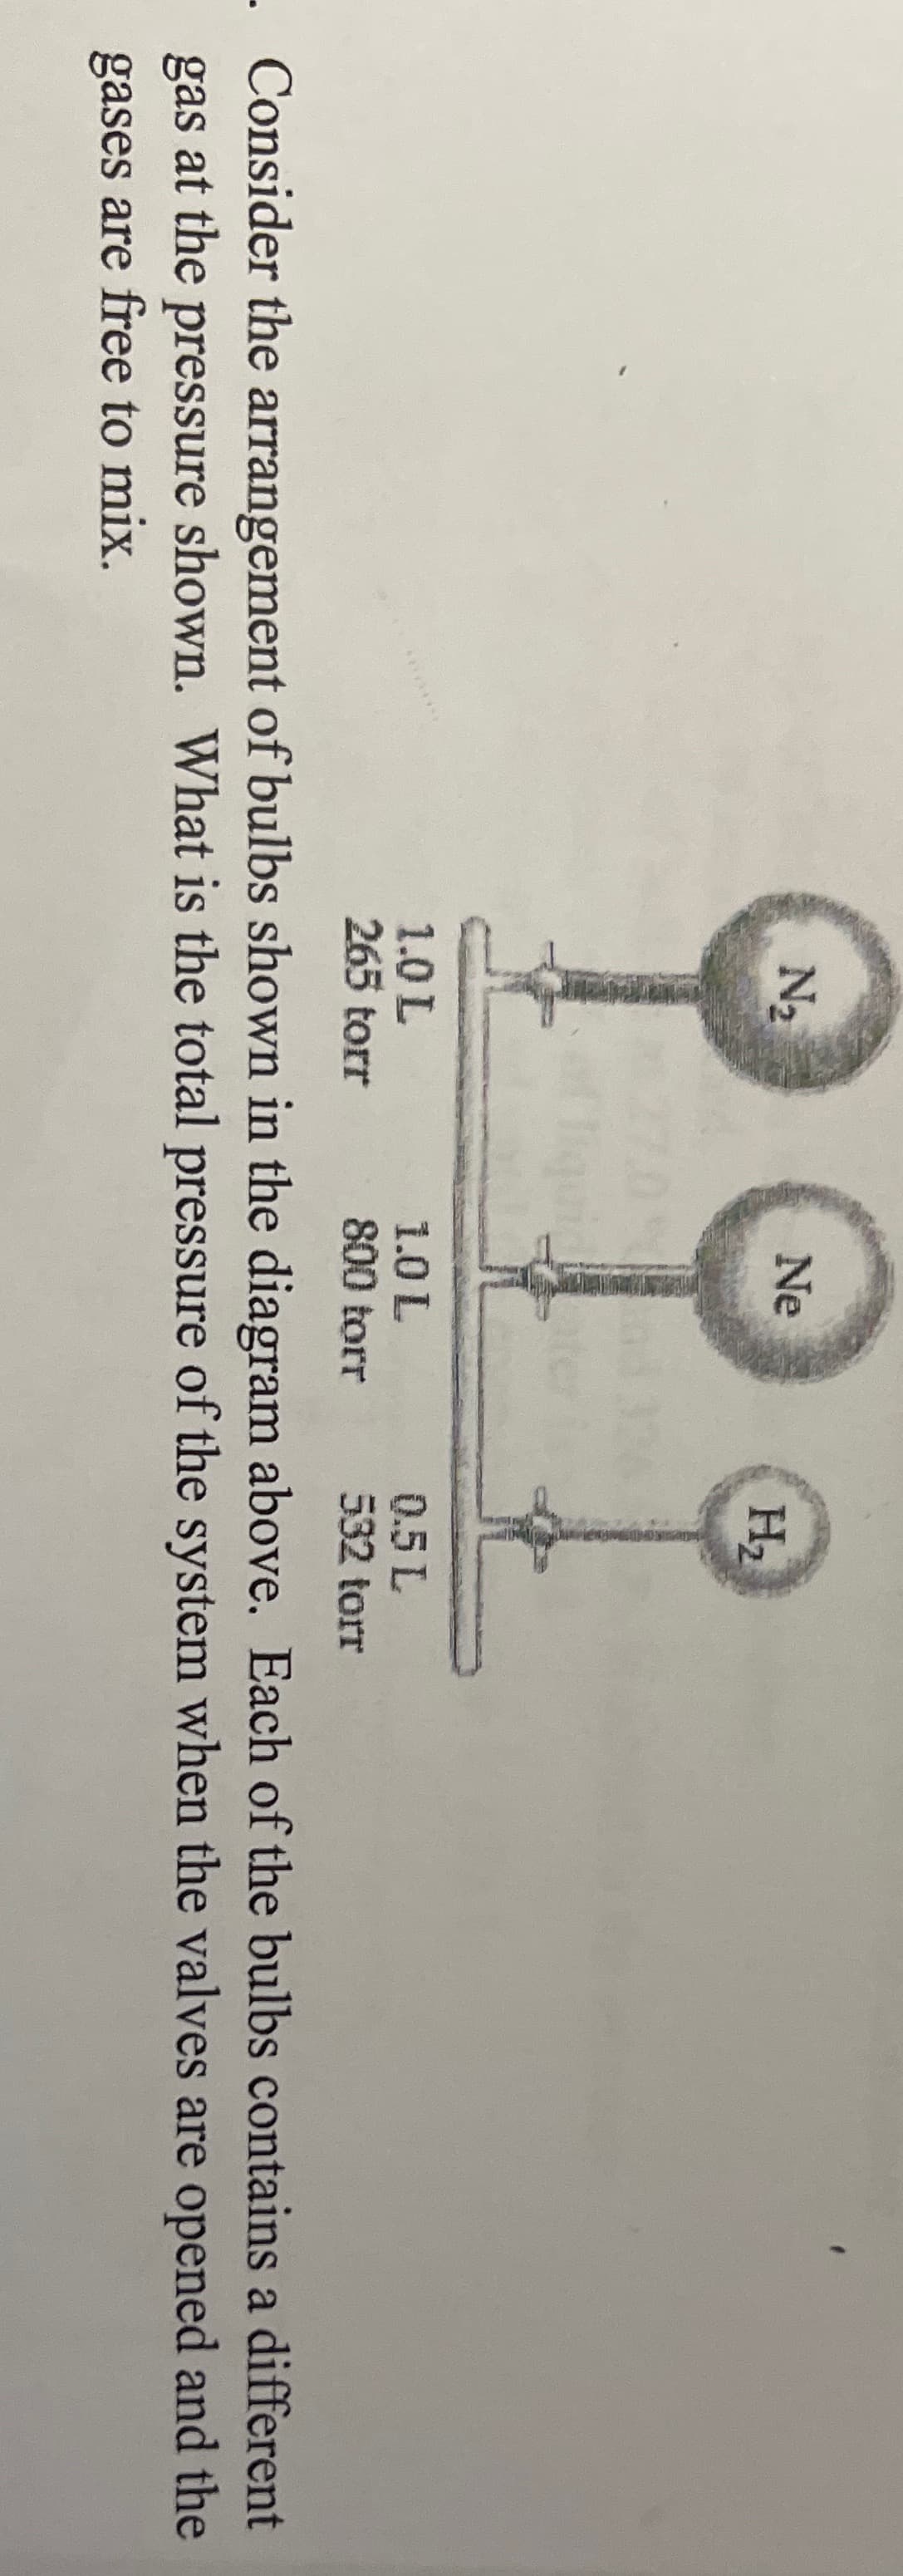 N2
Ne
H2
1.0 L
265 torr
1.0 L
800 torr
0.5 L
532 torr
Consider the arrangement of bulbs shown in the diagram above. Each of the bulbs contains a different
gas at the pressure shown. What is the total pressure of the system when the valves are opened and the
gases are free to mix.
